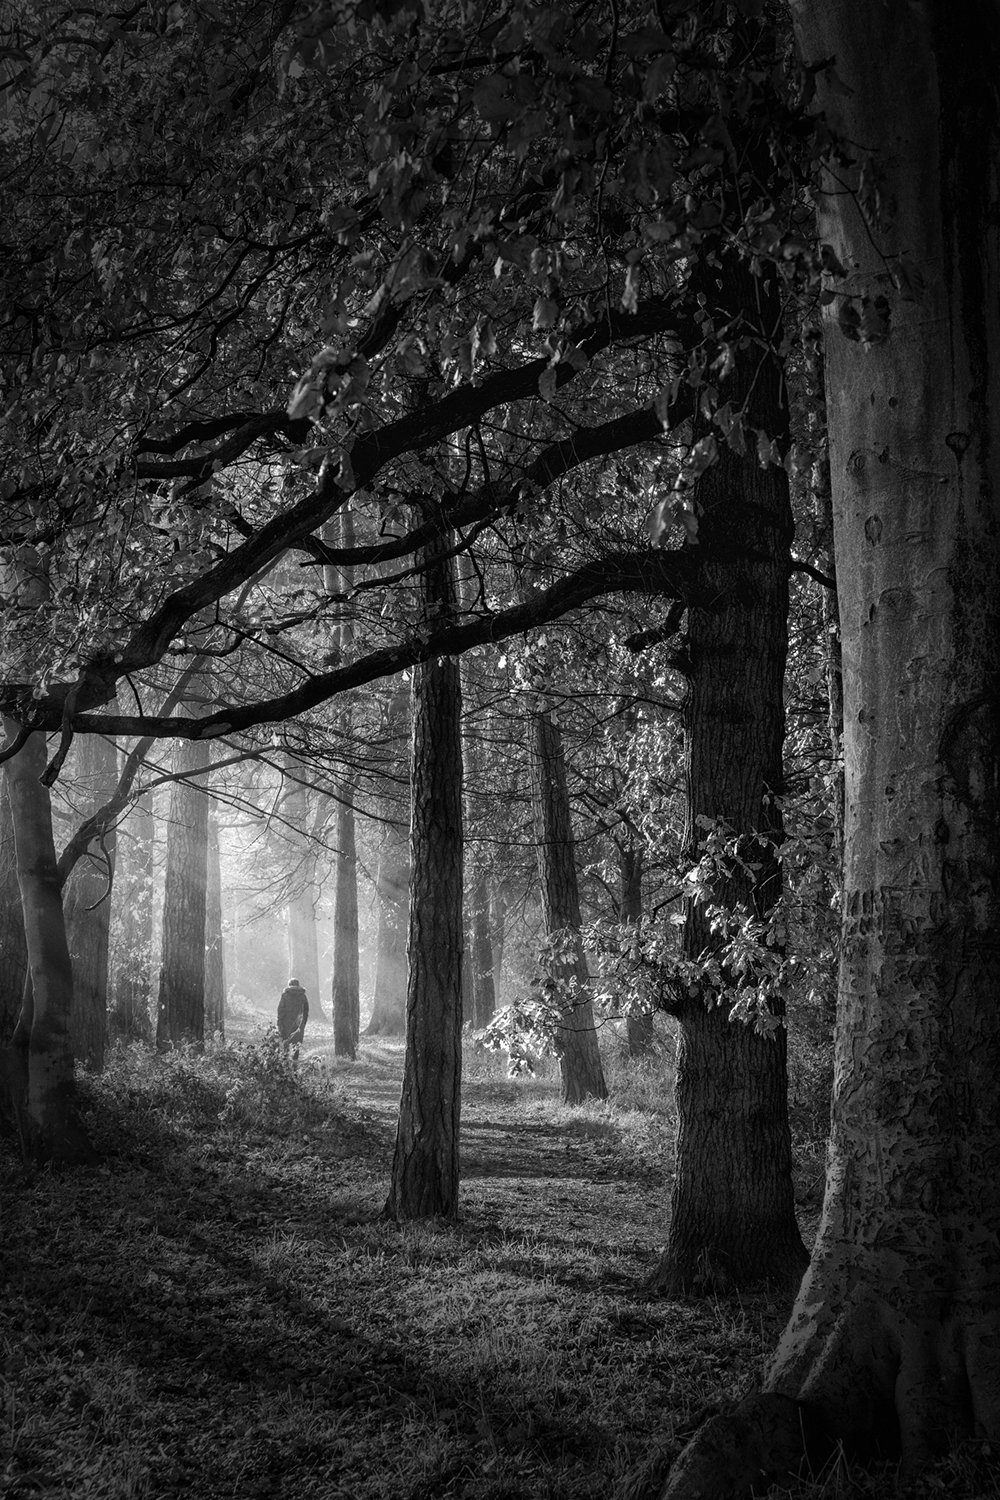  Stranger in the woods - Avenue of Trees Acklam 